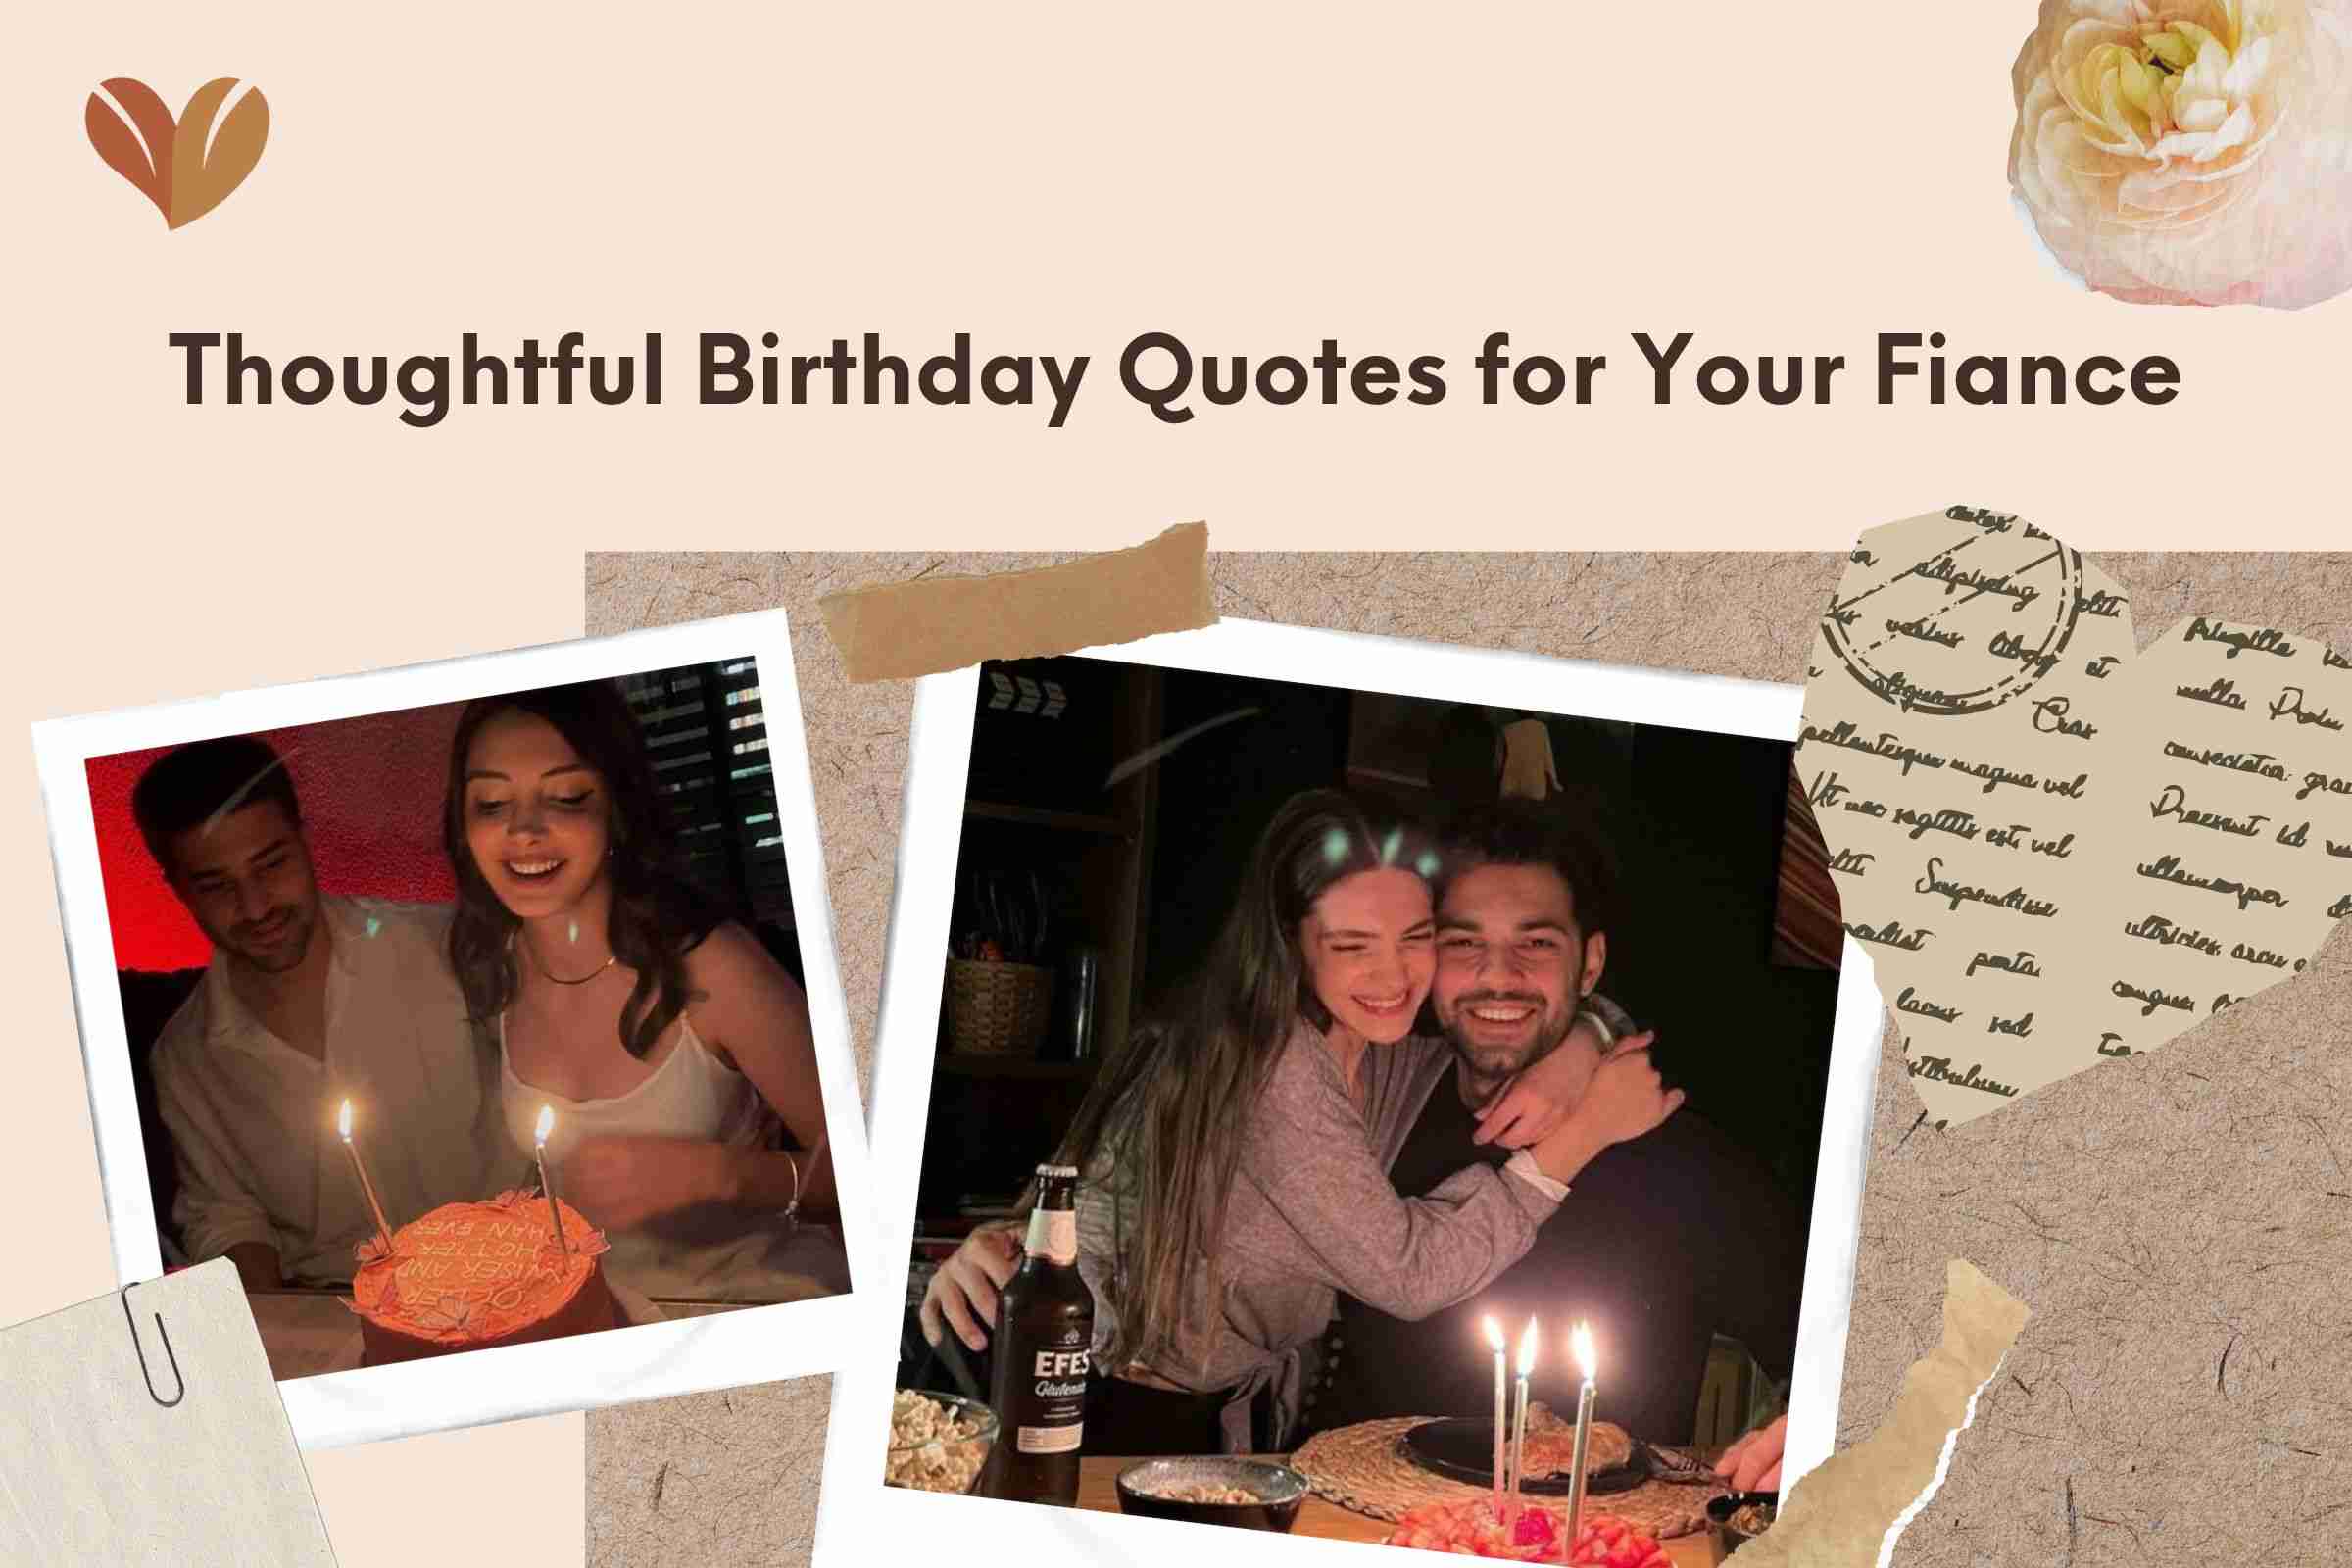 Thoughtful Birthday Quotes for Your Fiance